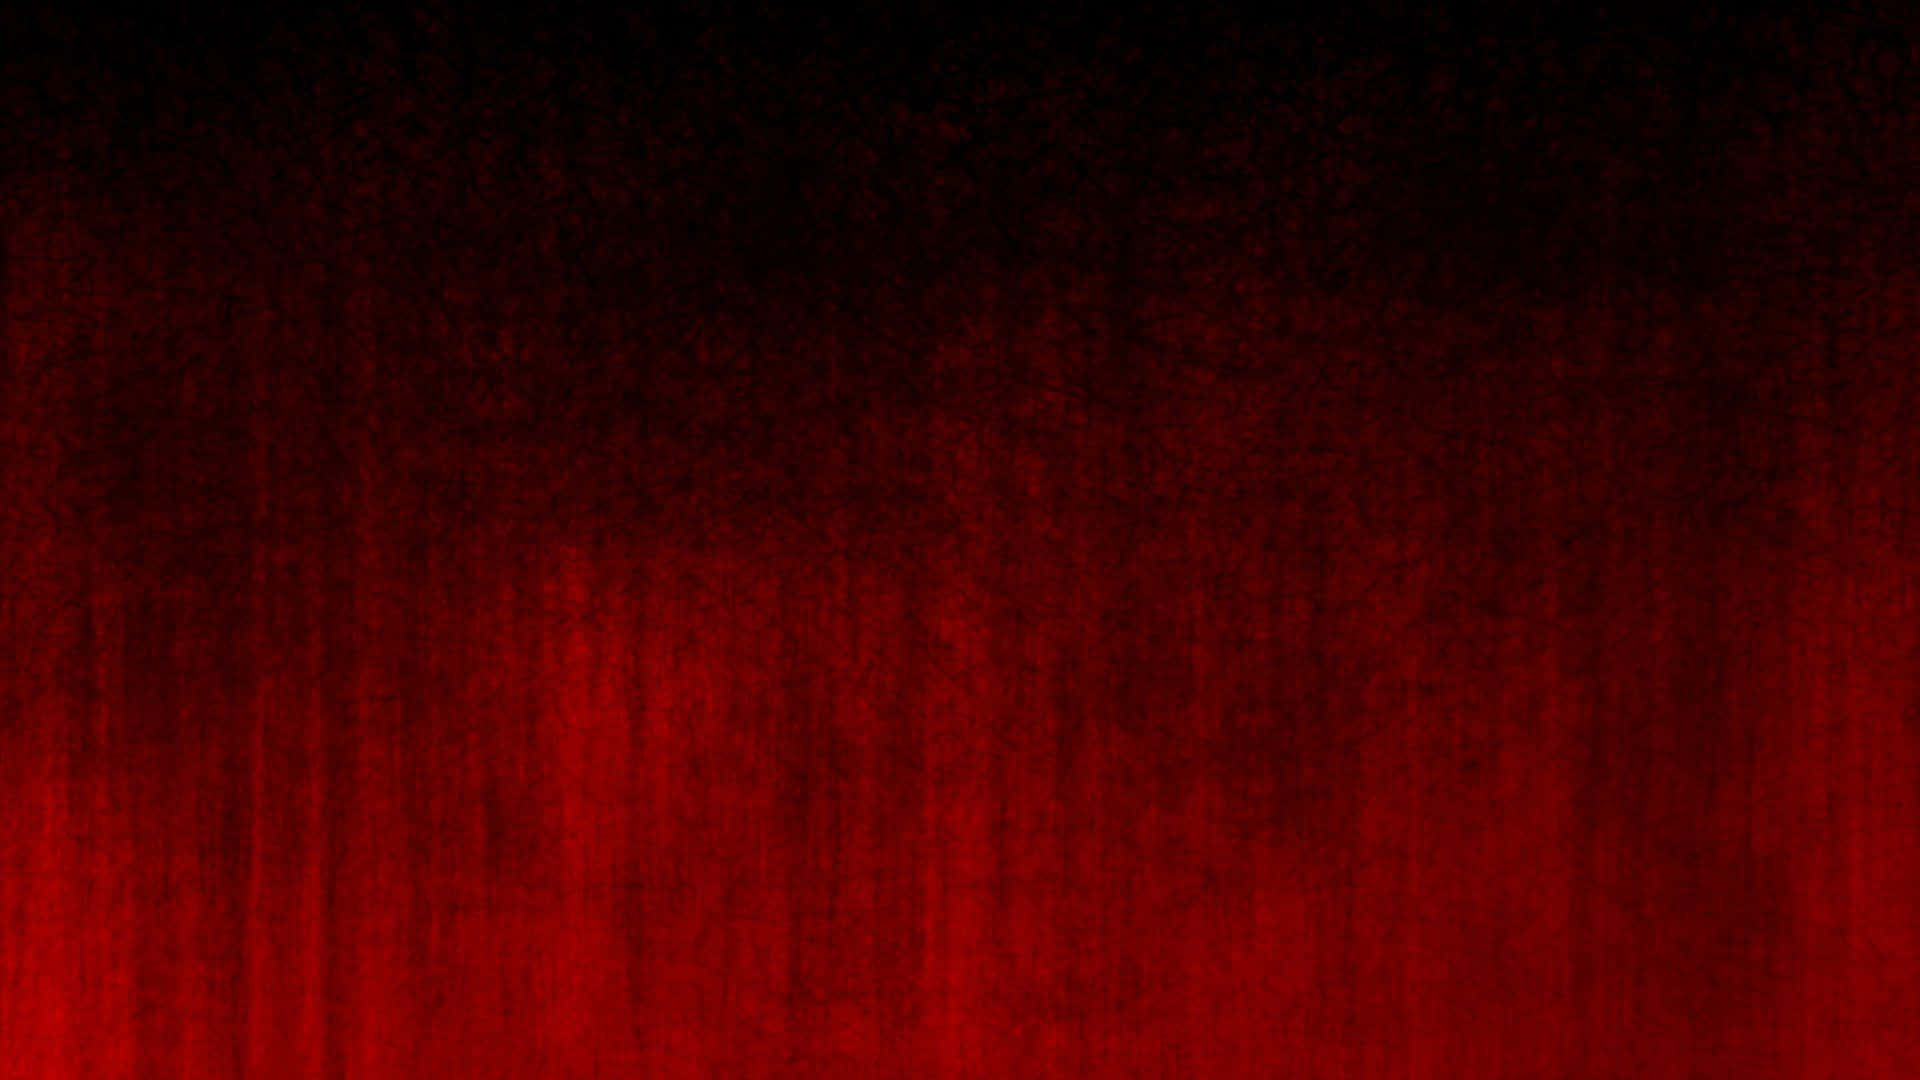 Red Grunge - A Bold and Inspiring Aesthetic Wallpaper